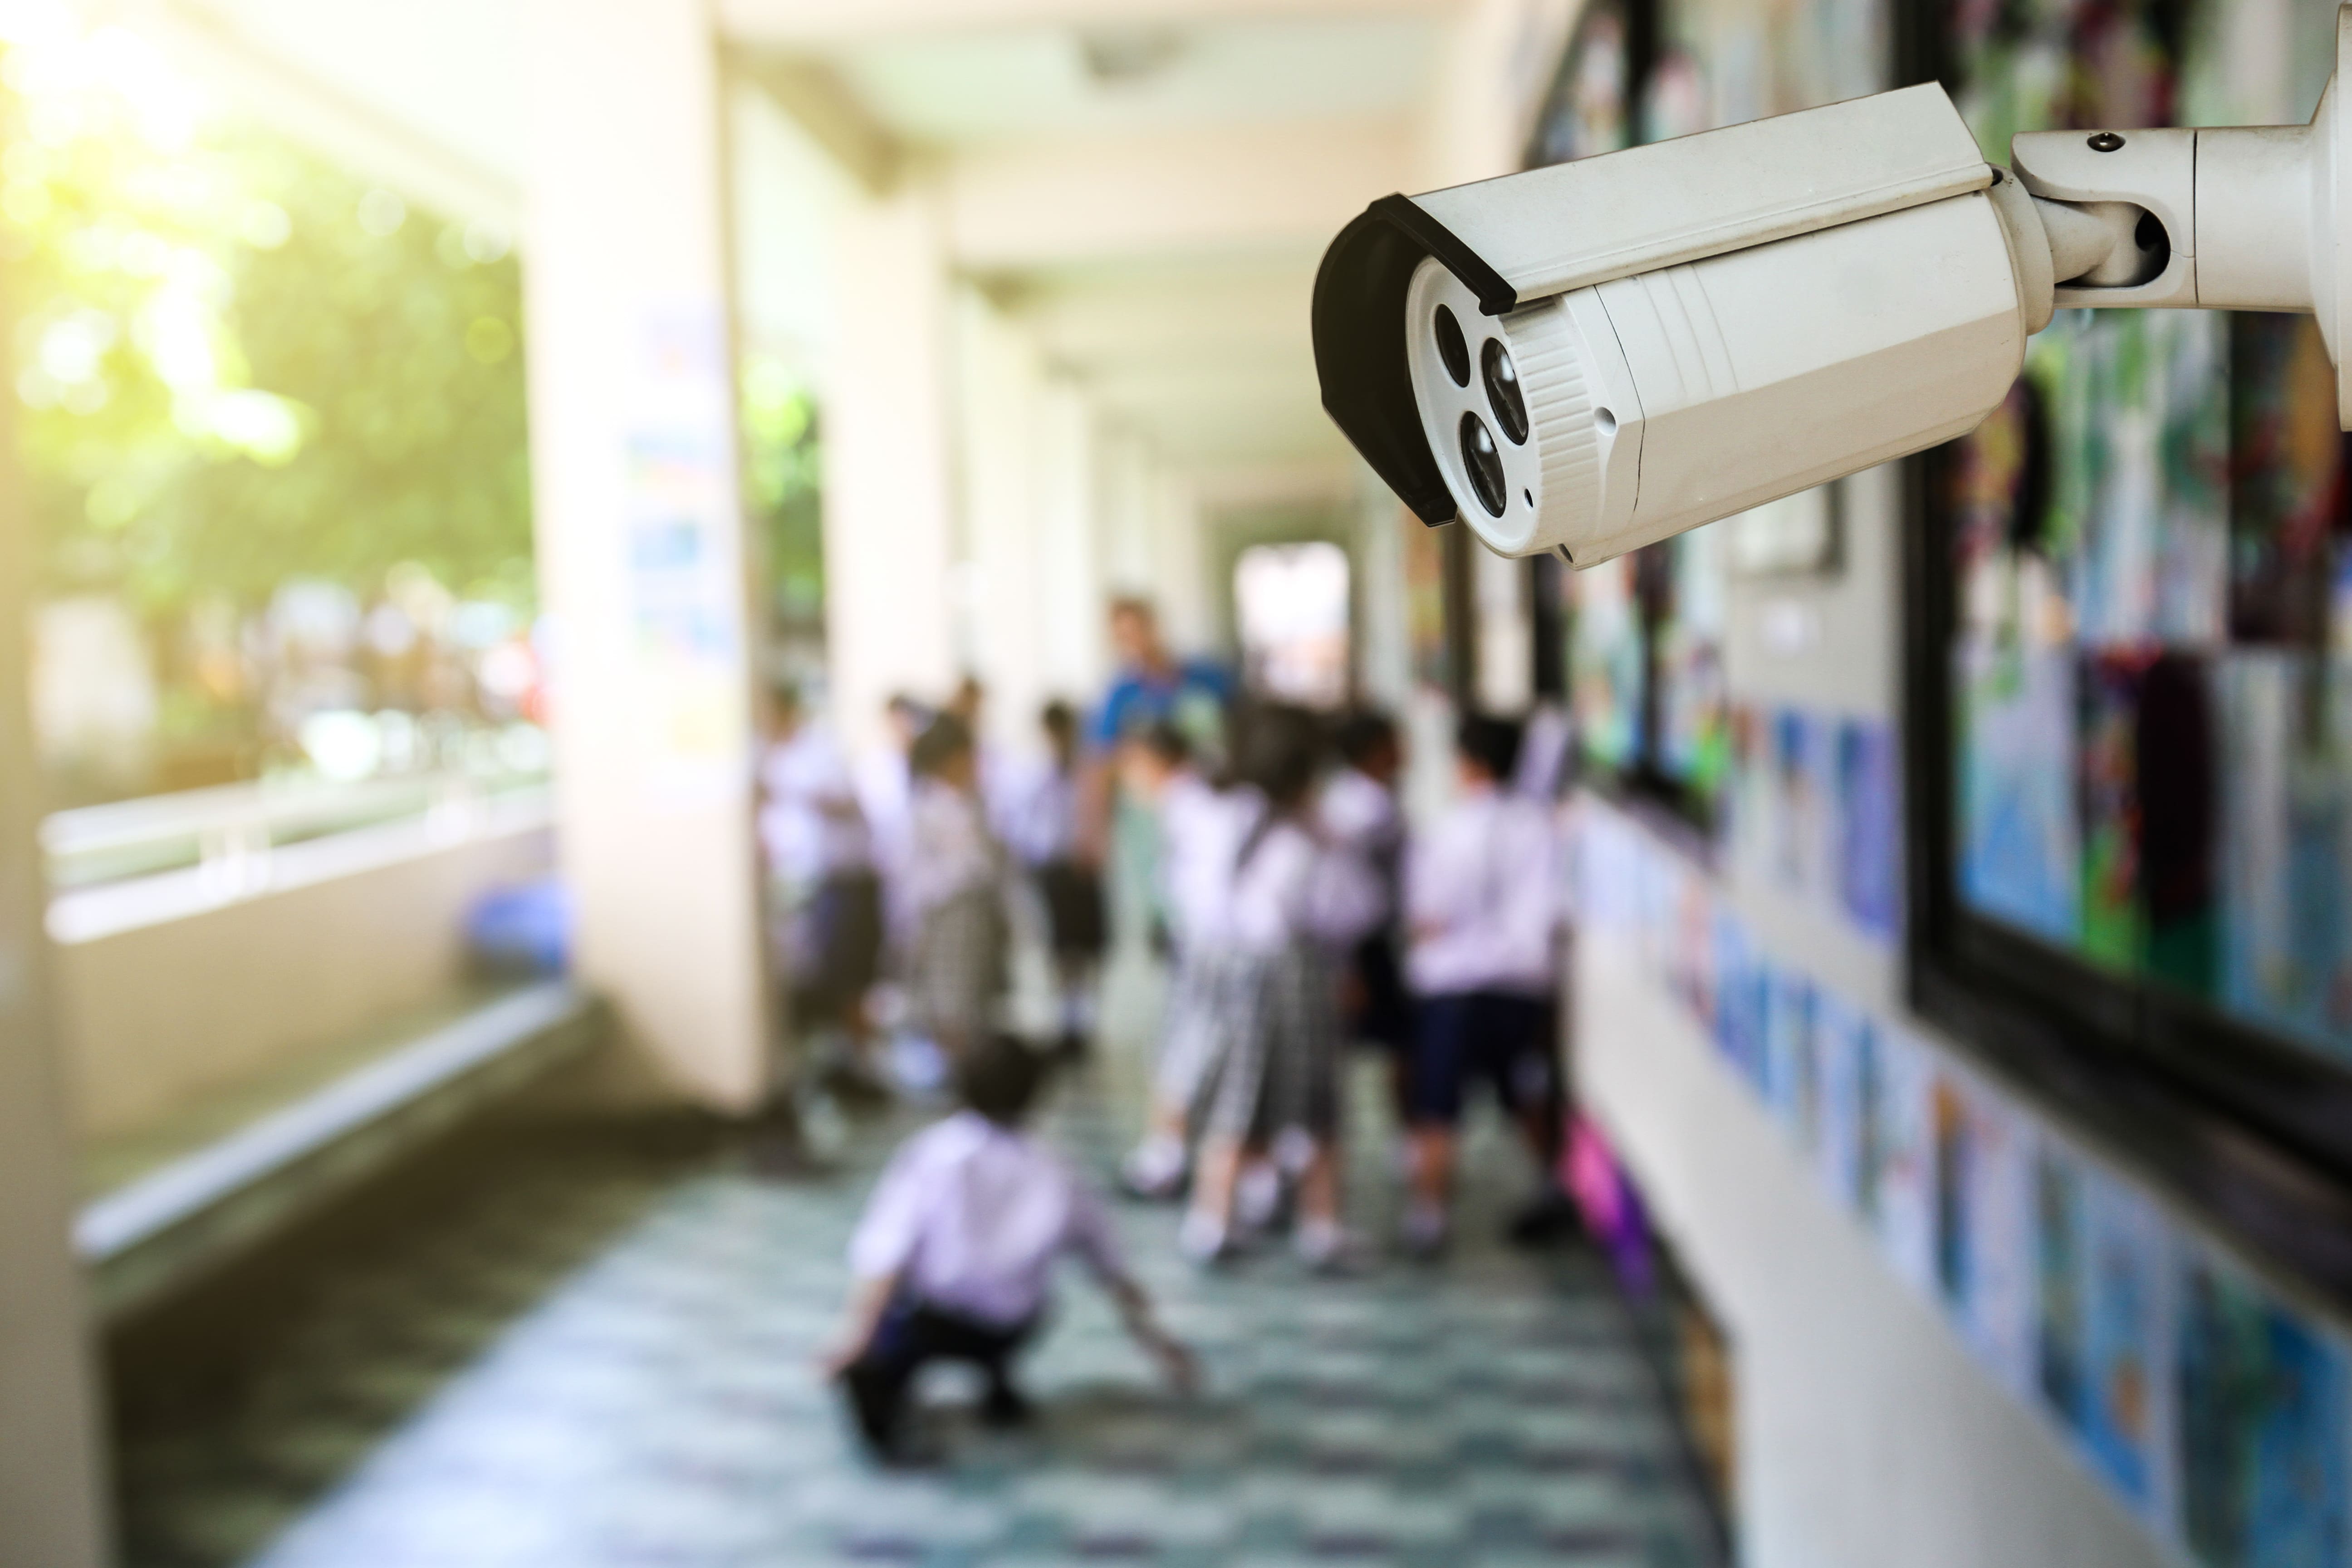 image of CCTV camera overlooking school children playing outside 